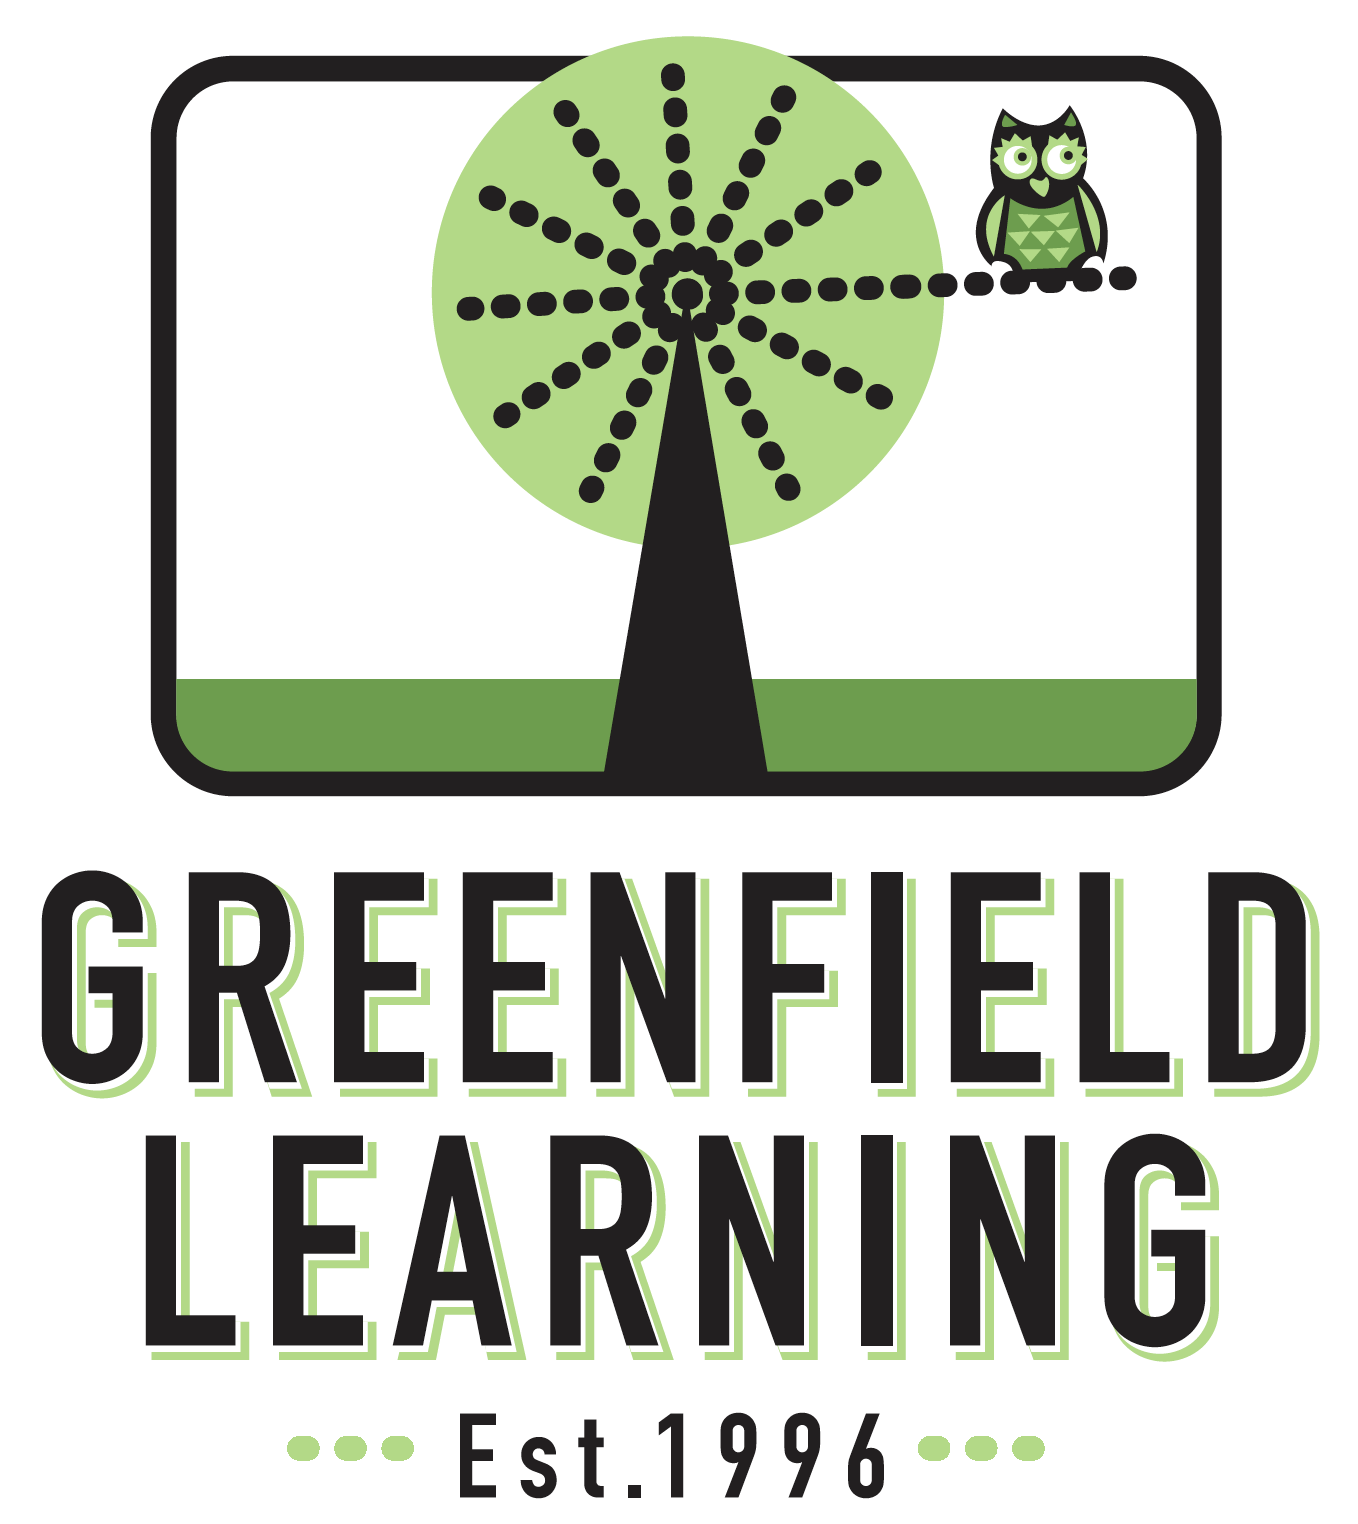 Greenfield Learning